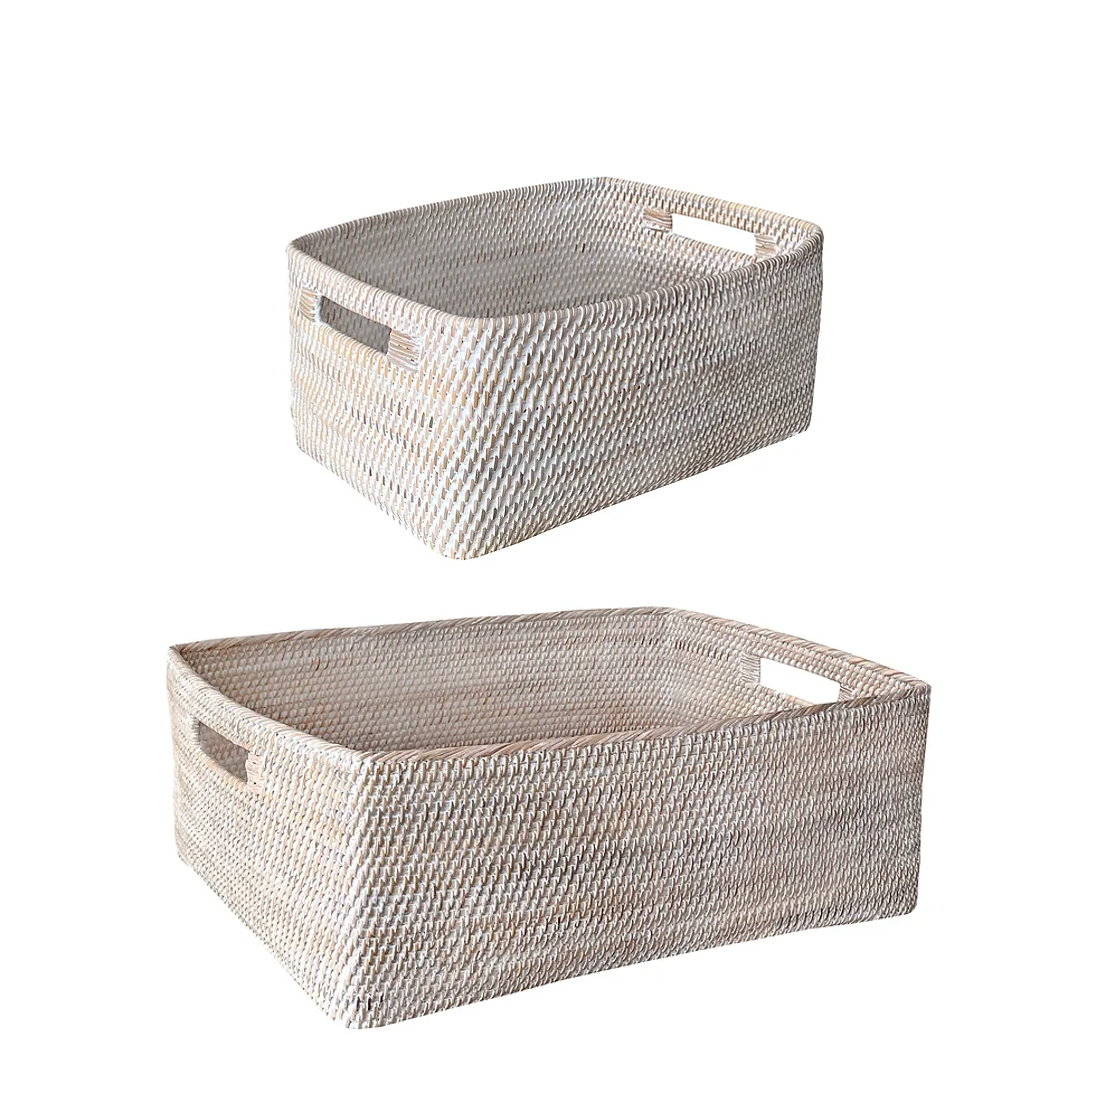 Baum Natural Rush Seagrass Set of 3 Decorative Storage Basket with Handles,  Color: Natural - JCPenney